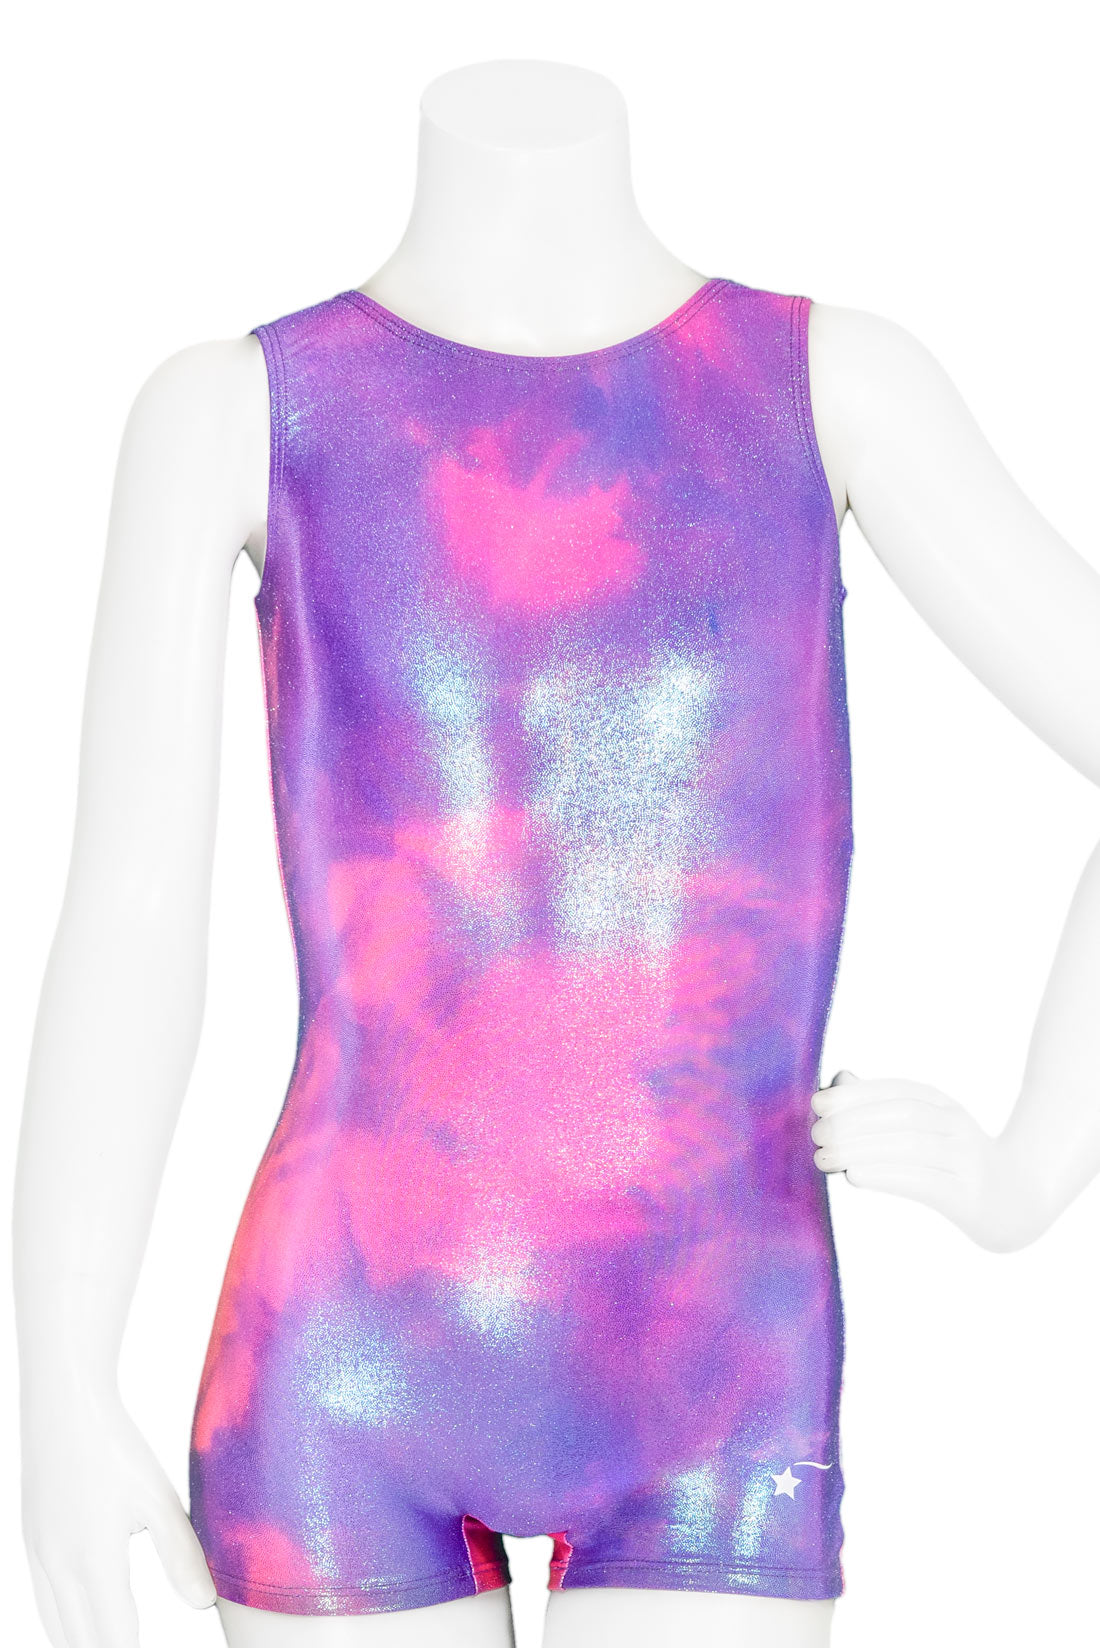 Front of a pink and purple cloud tie dye gymnastic unitard by Destira, 2023